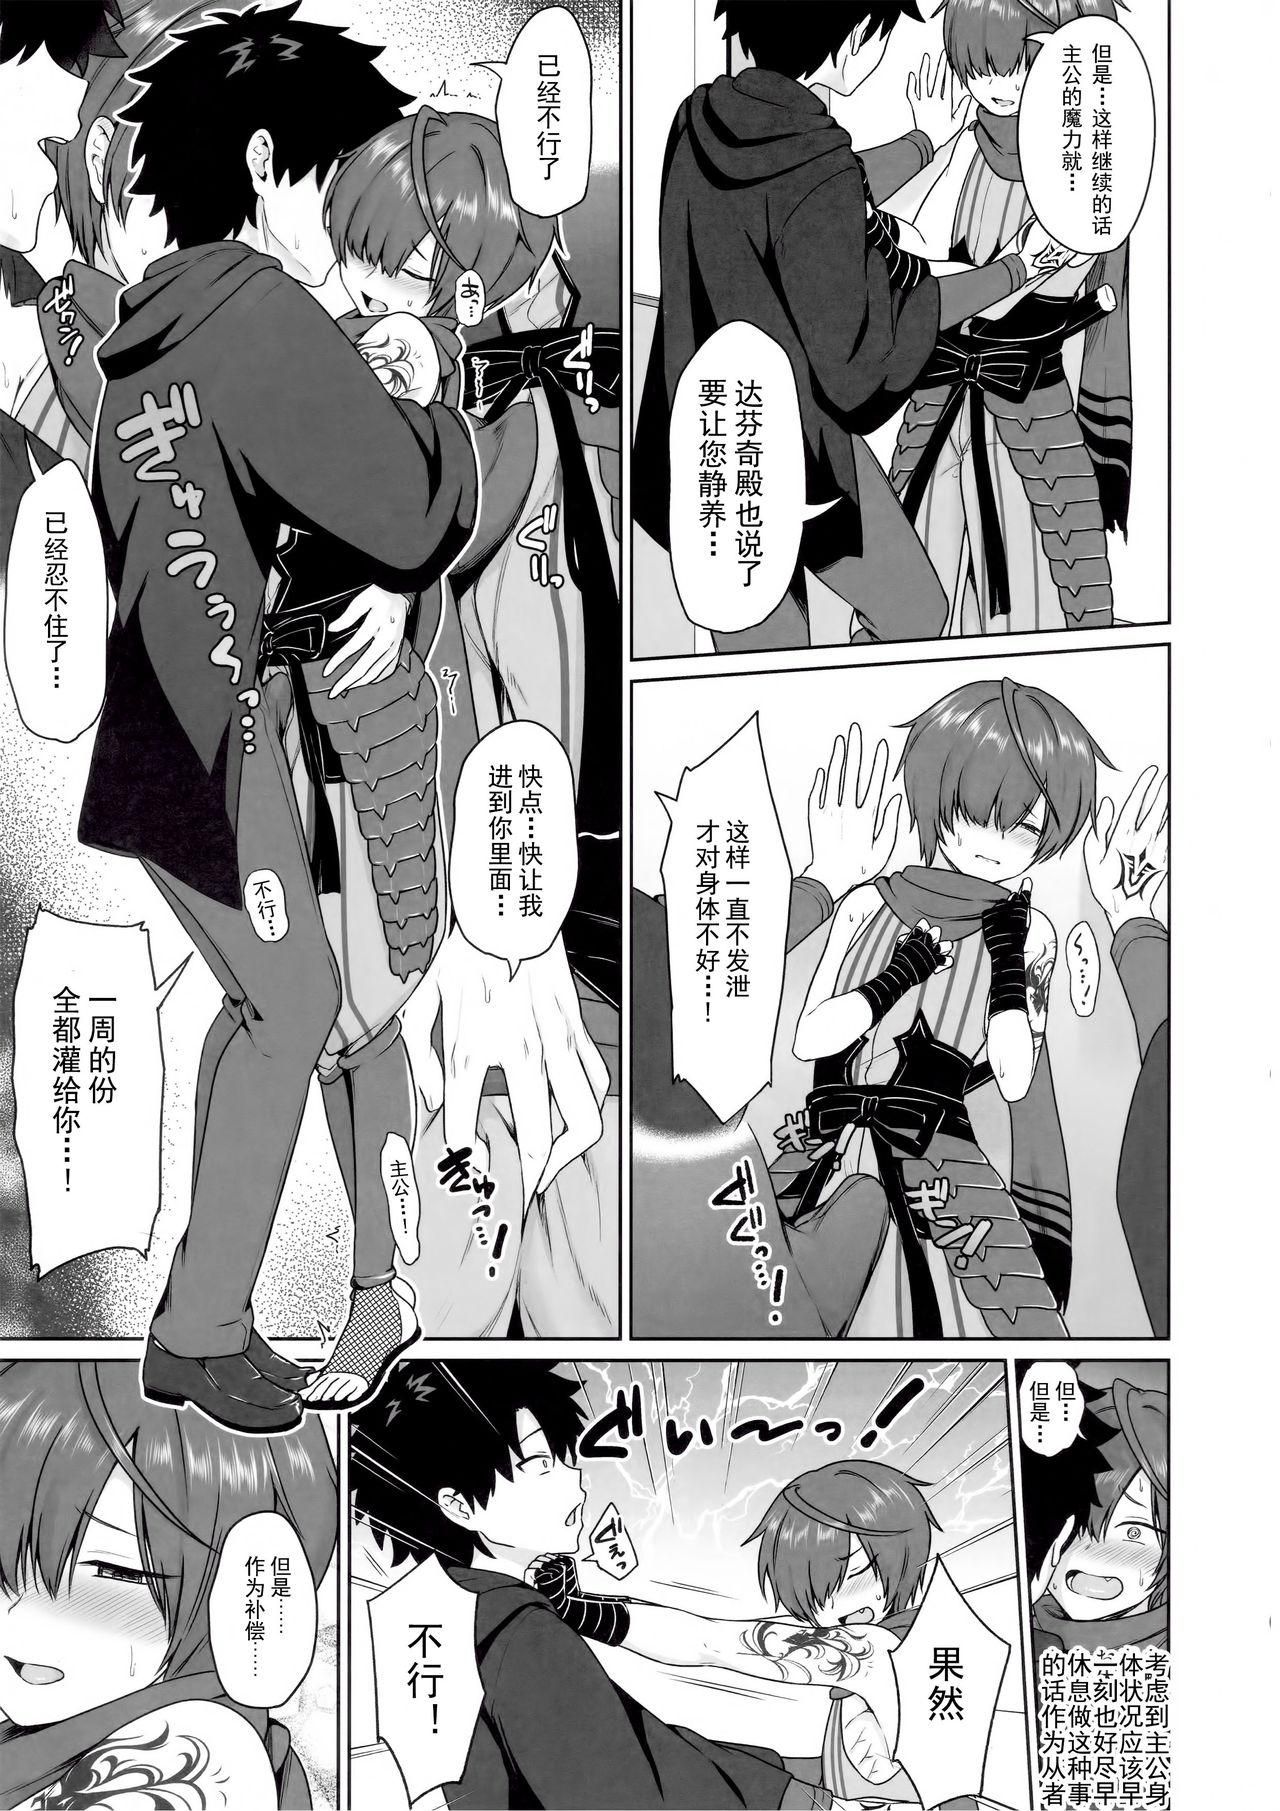 Tight Pussy Porn Ikemasen Aruji-dono|这样不行，主公 - Fate grand order Hot - Page 6